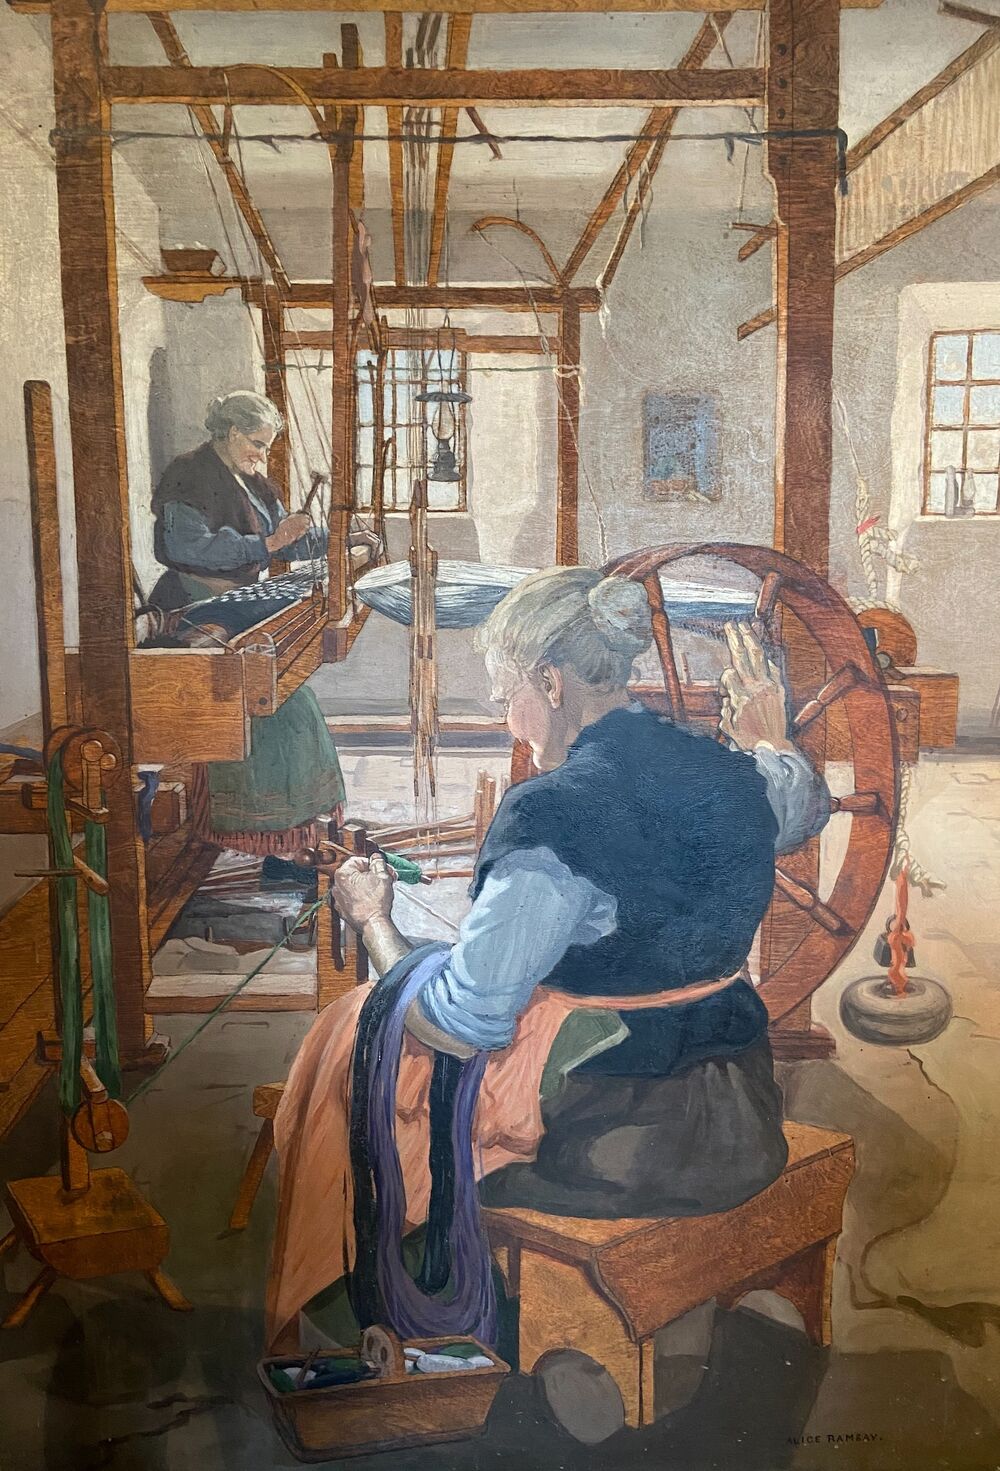 An oil painting of two women sitting at a large wooden loom, weaving. The woman in the foreground is spinning green thread through a spinning wheel. The woman in the background is operating the wooden foot pedals of the loom.